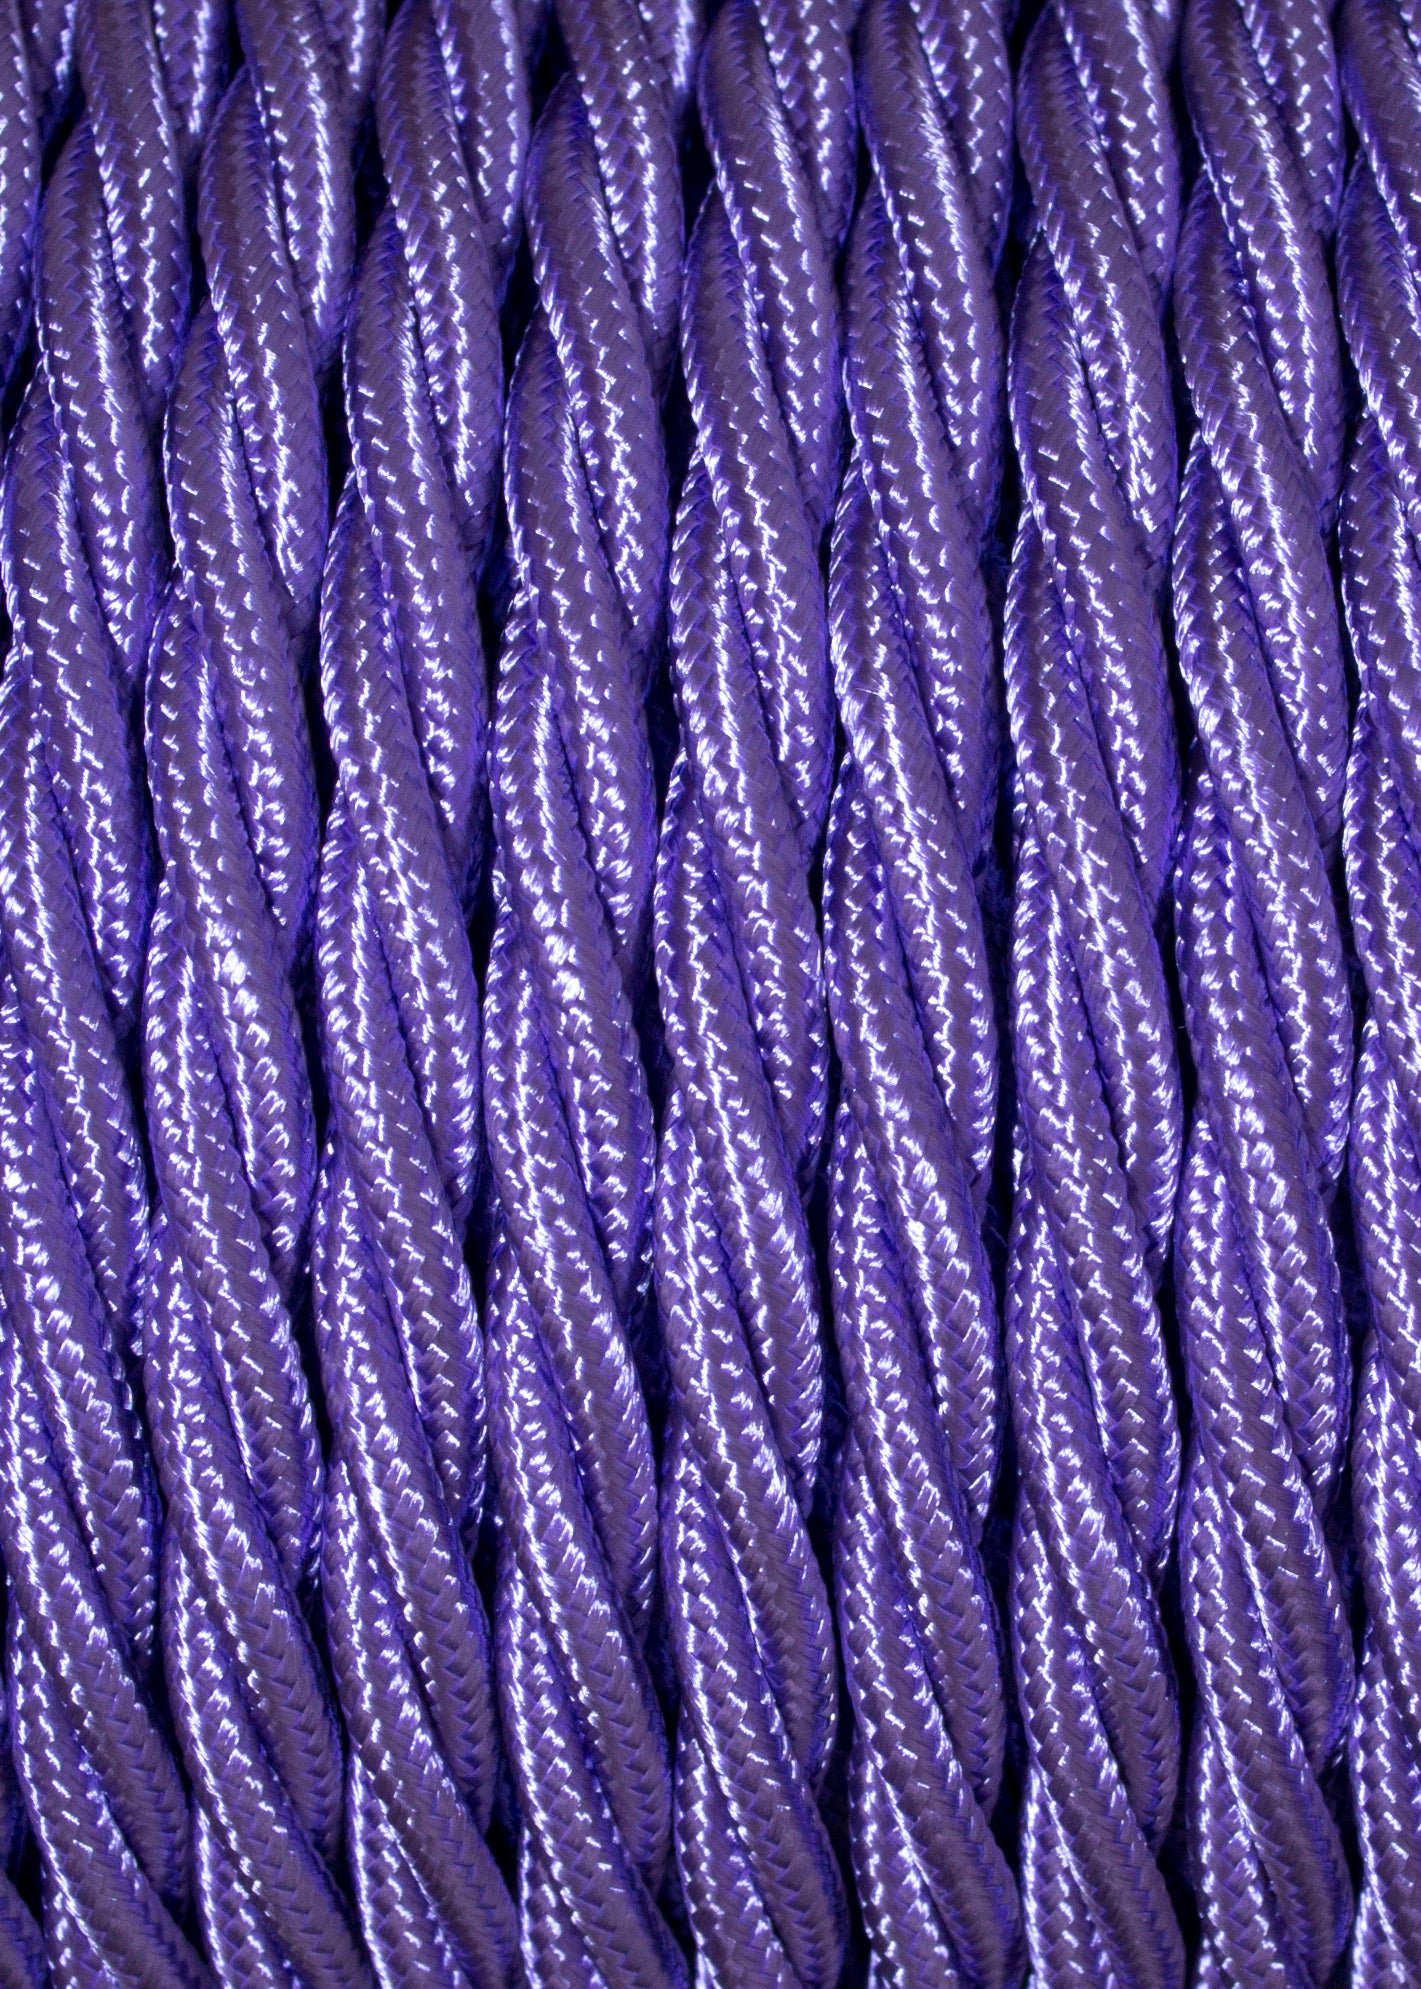 Violet  - Lola's Leads Fabric Extension Cable